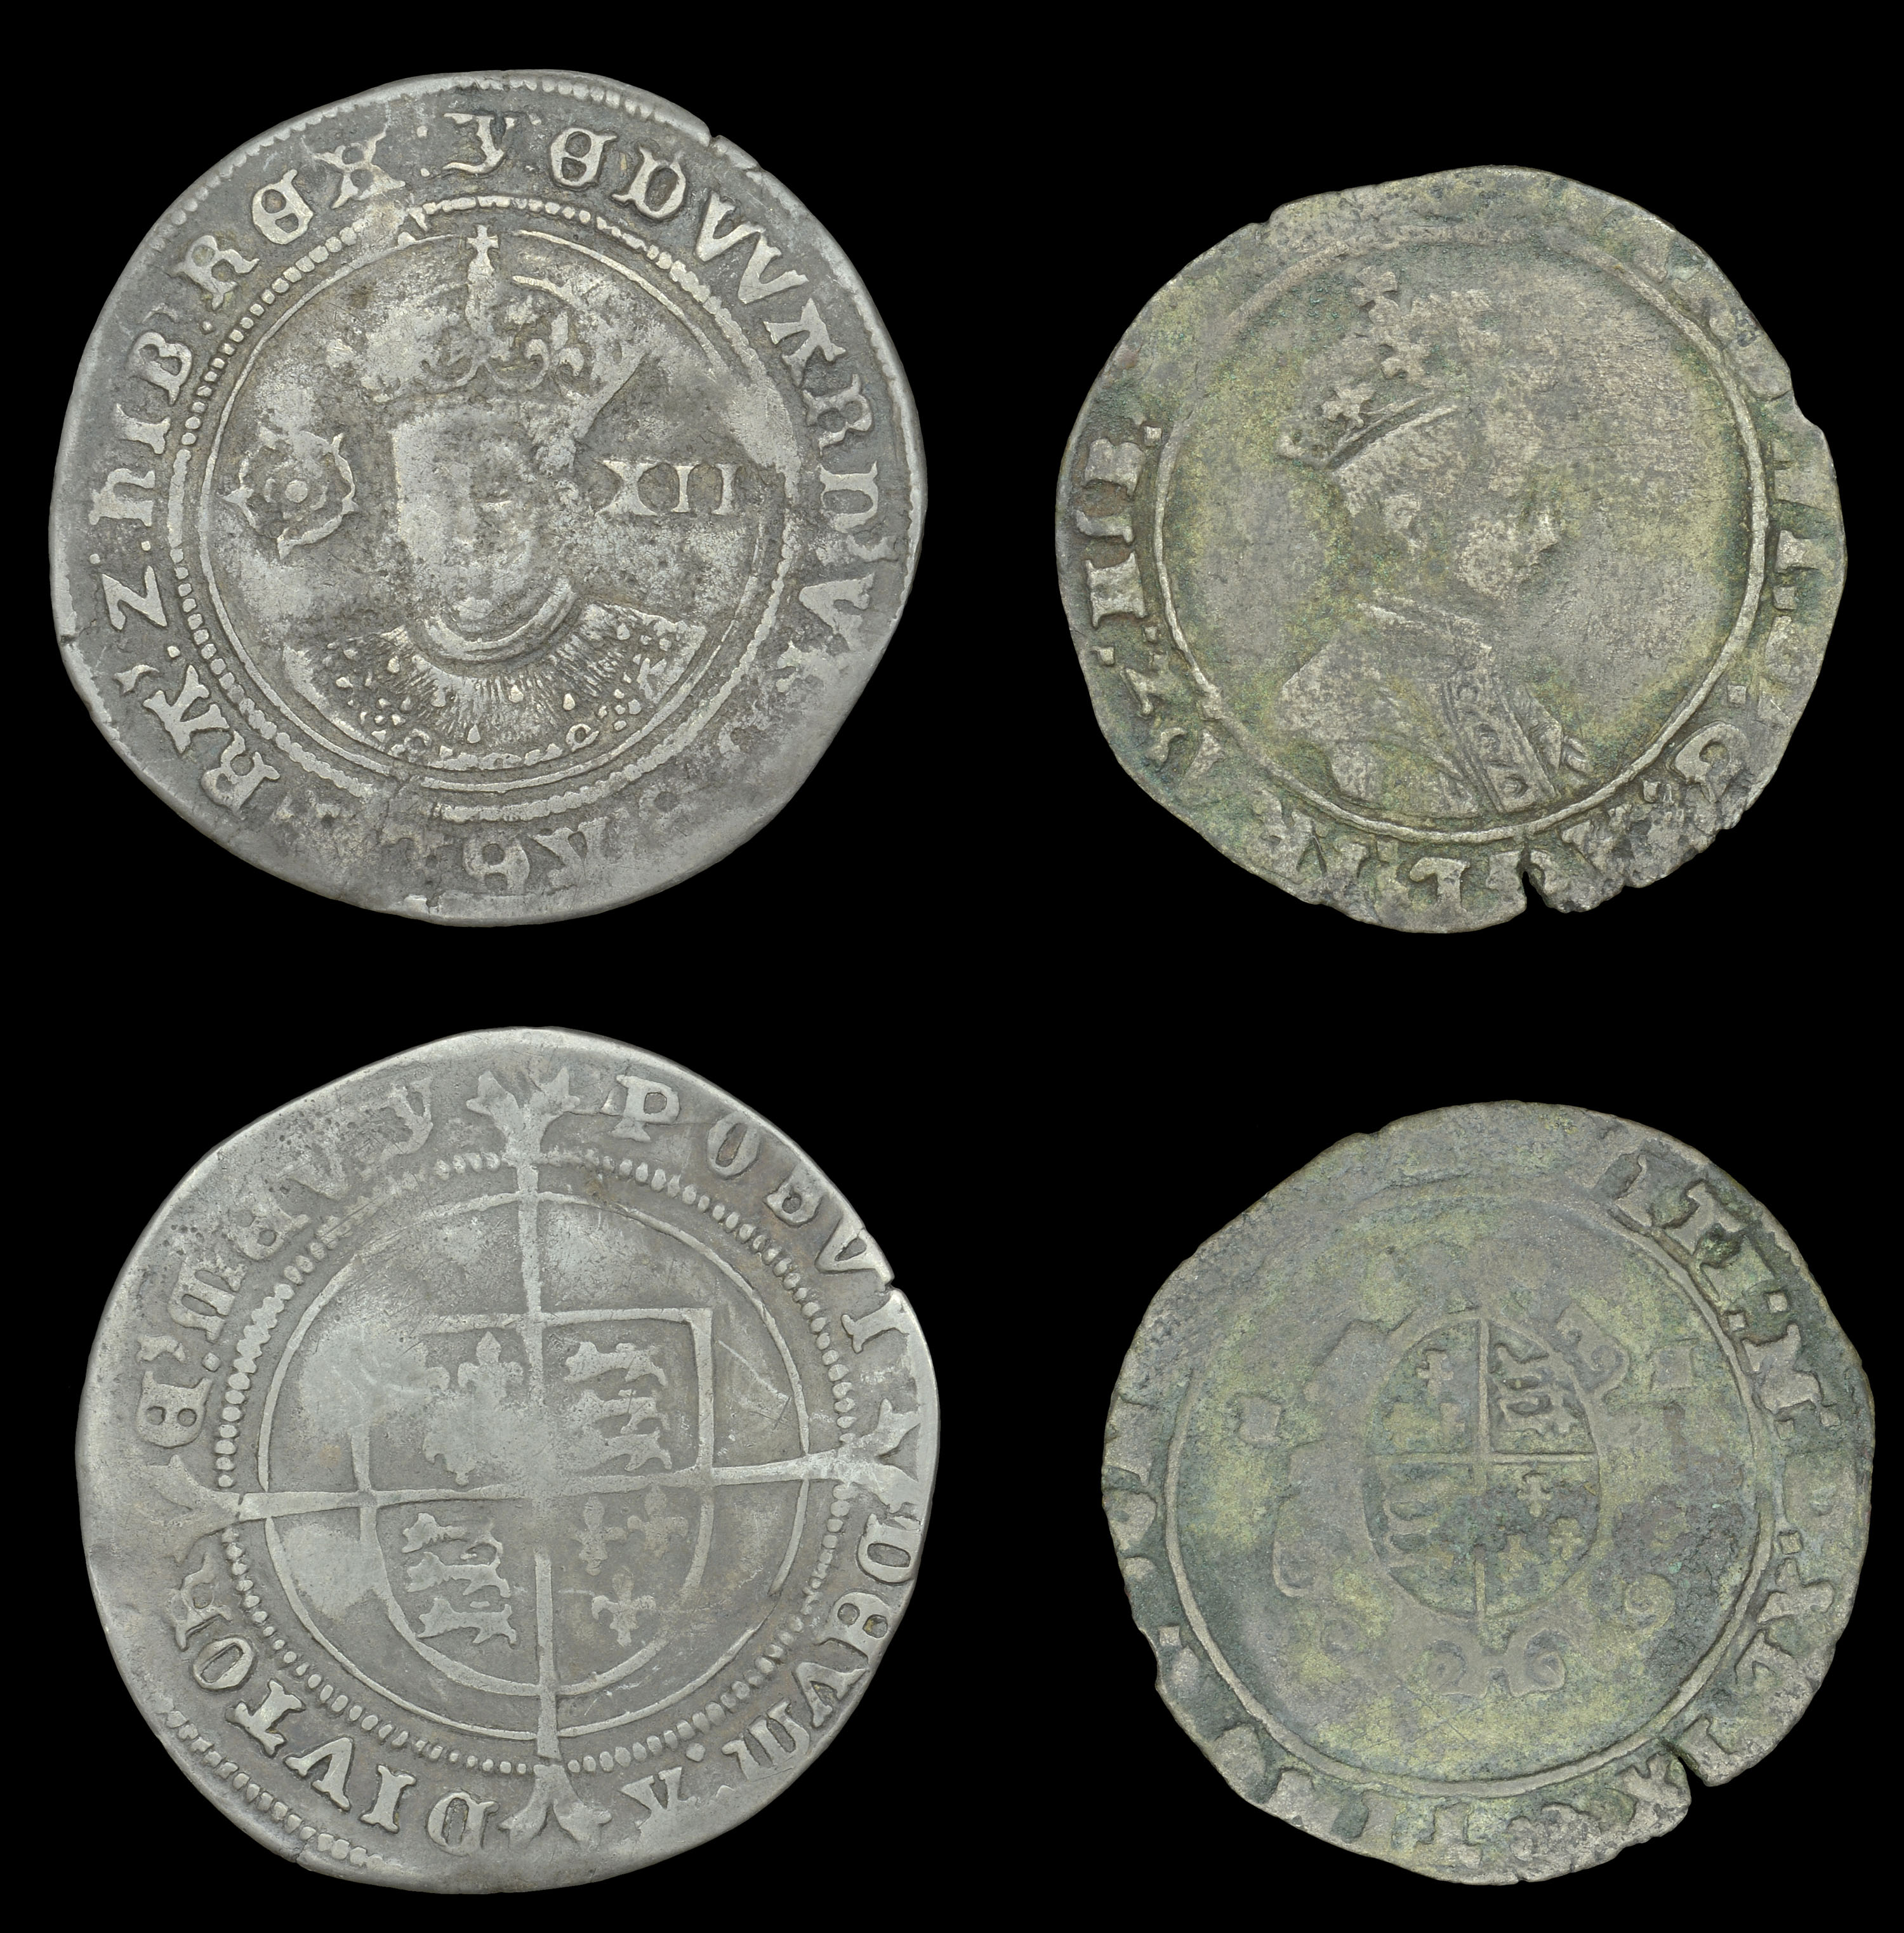 British Coins from the Collection of the late Richard Plant